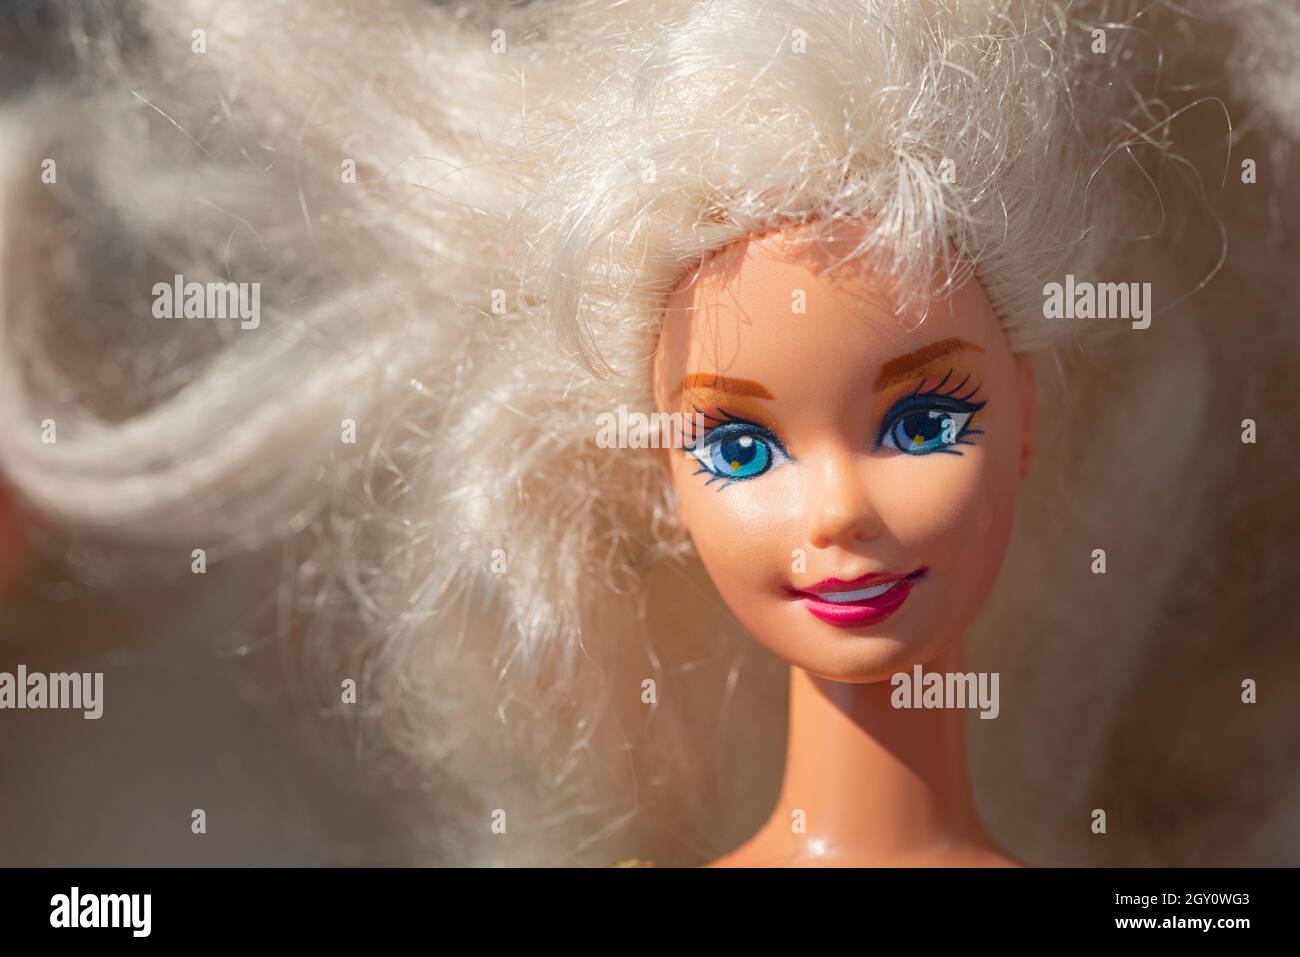 Close-up of a Barbie Doll Face with Blonde Hair Stock Photo